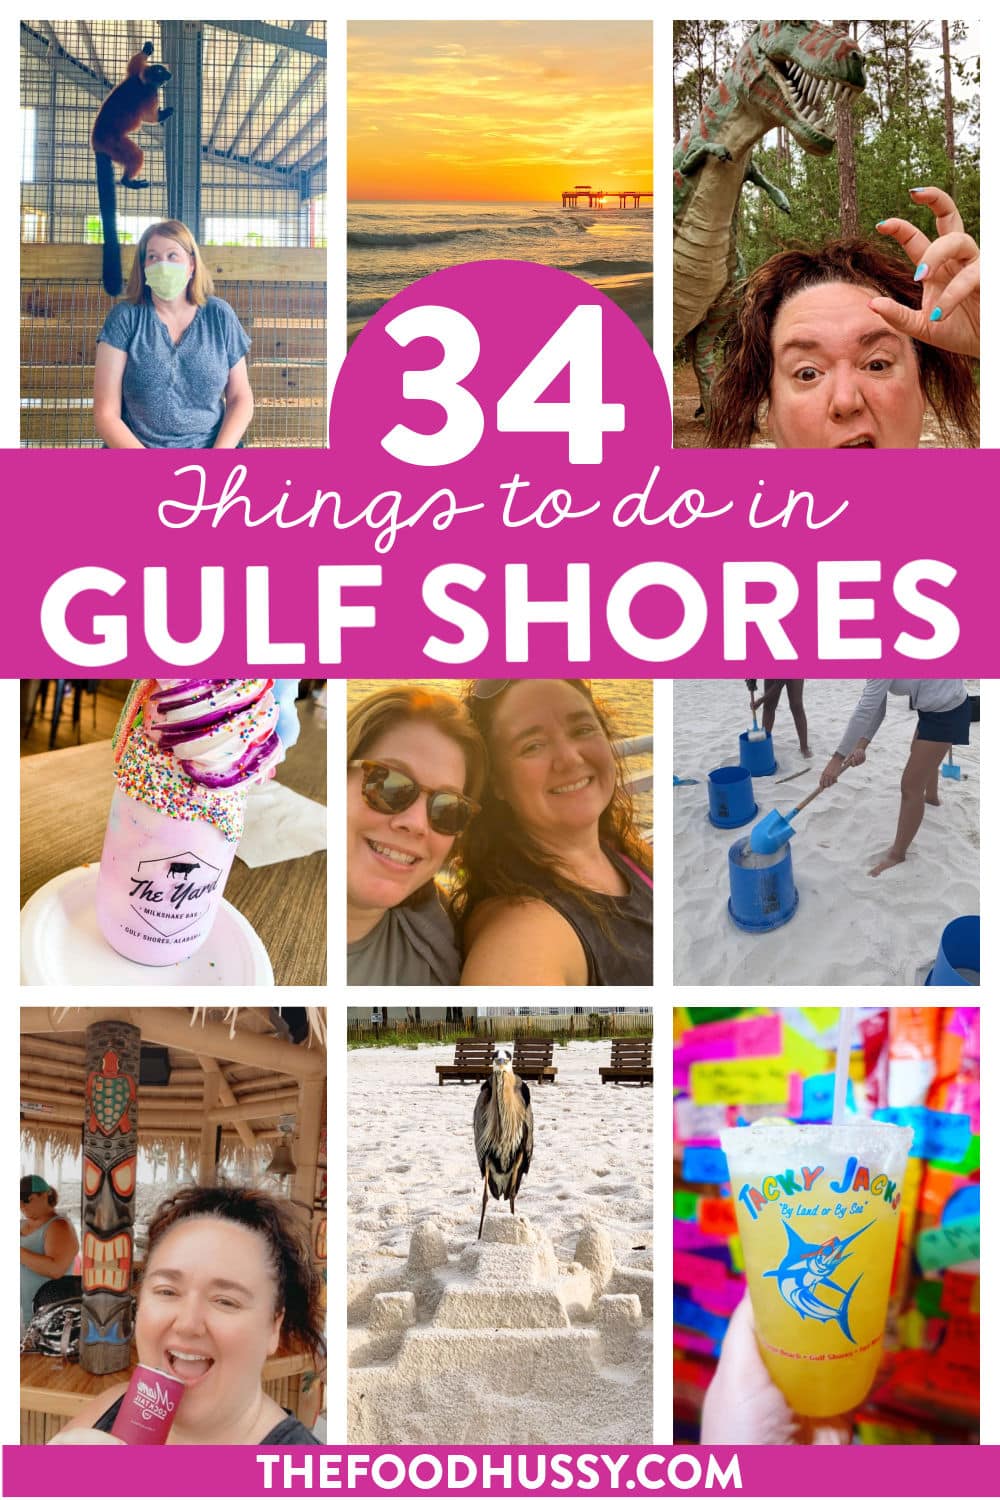 There are so many things to do near Gulf Shores and Orange Beach - this list will give you a big jump on all the ideas for trip planning! You'll find over 30 things to do for folks of all ages! Whether you want to fish, beach, eat, drink or see the sites - I've got you covered! via @foodhussy